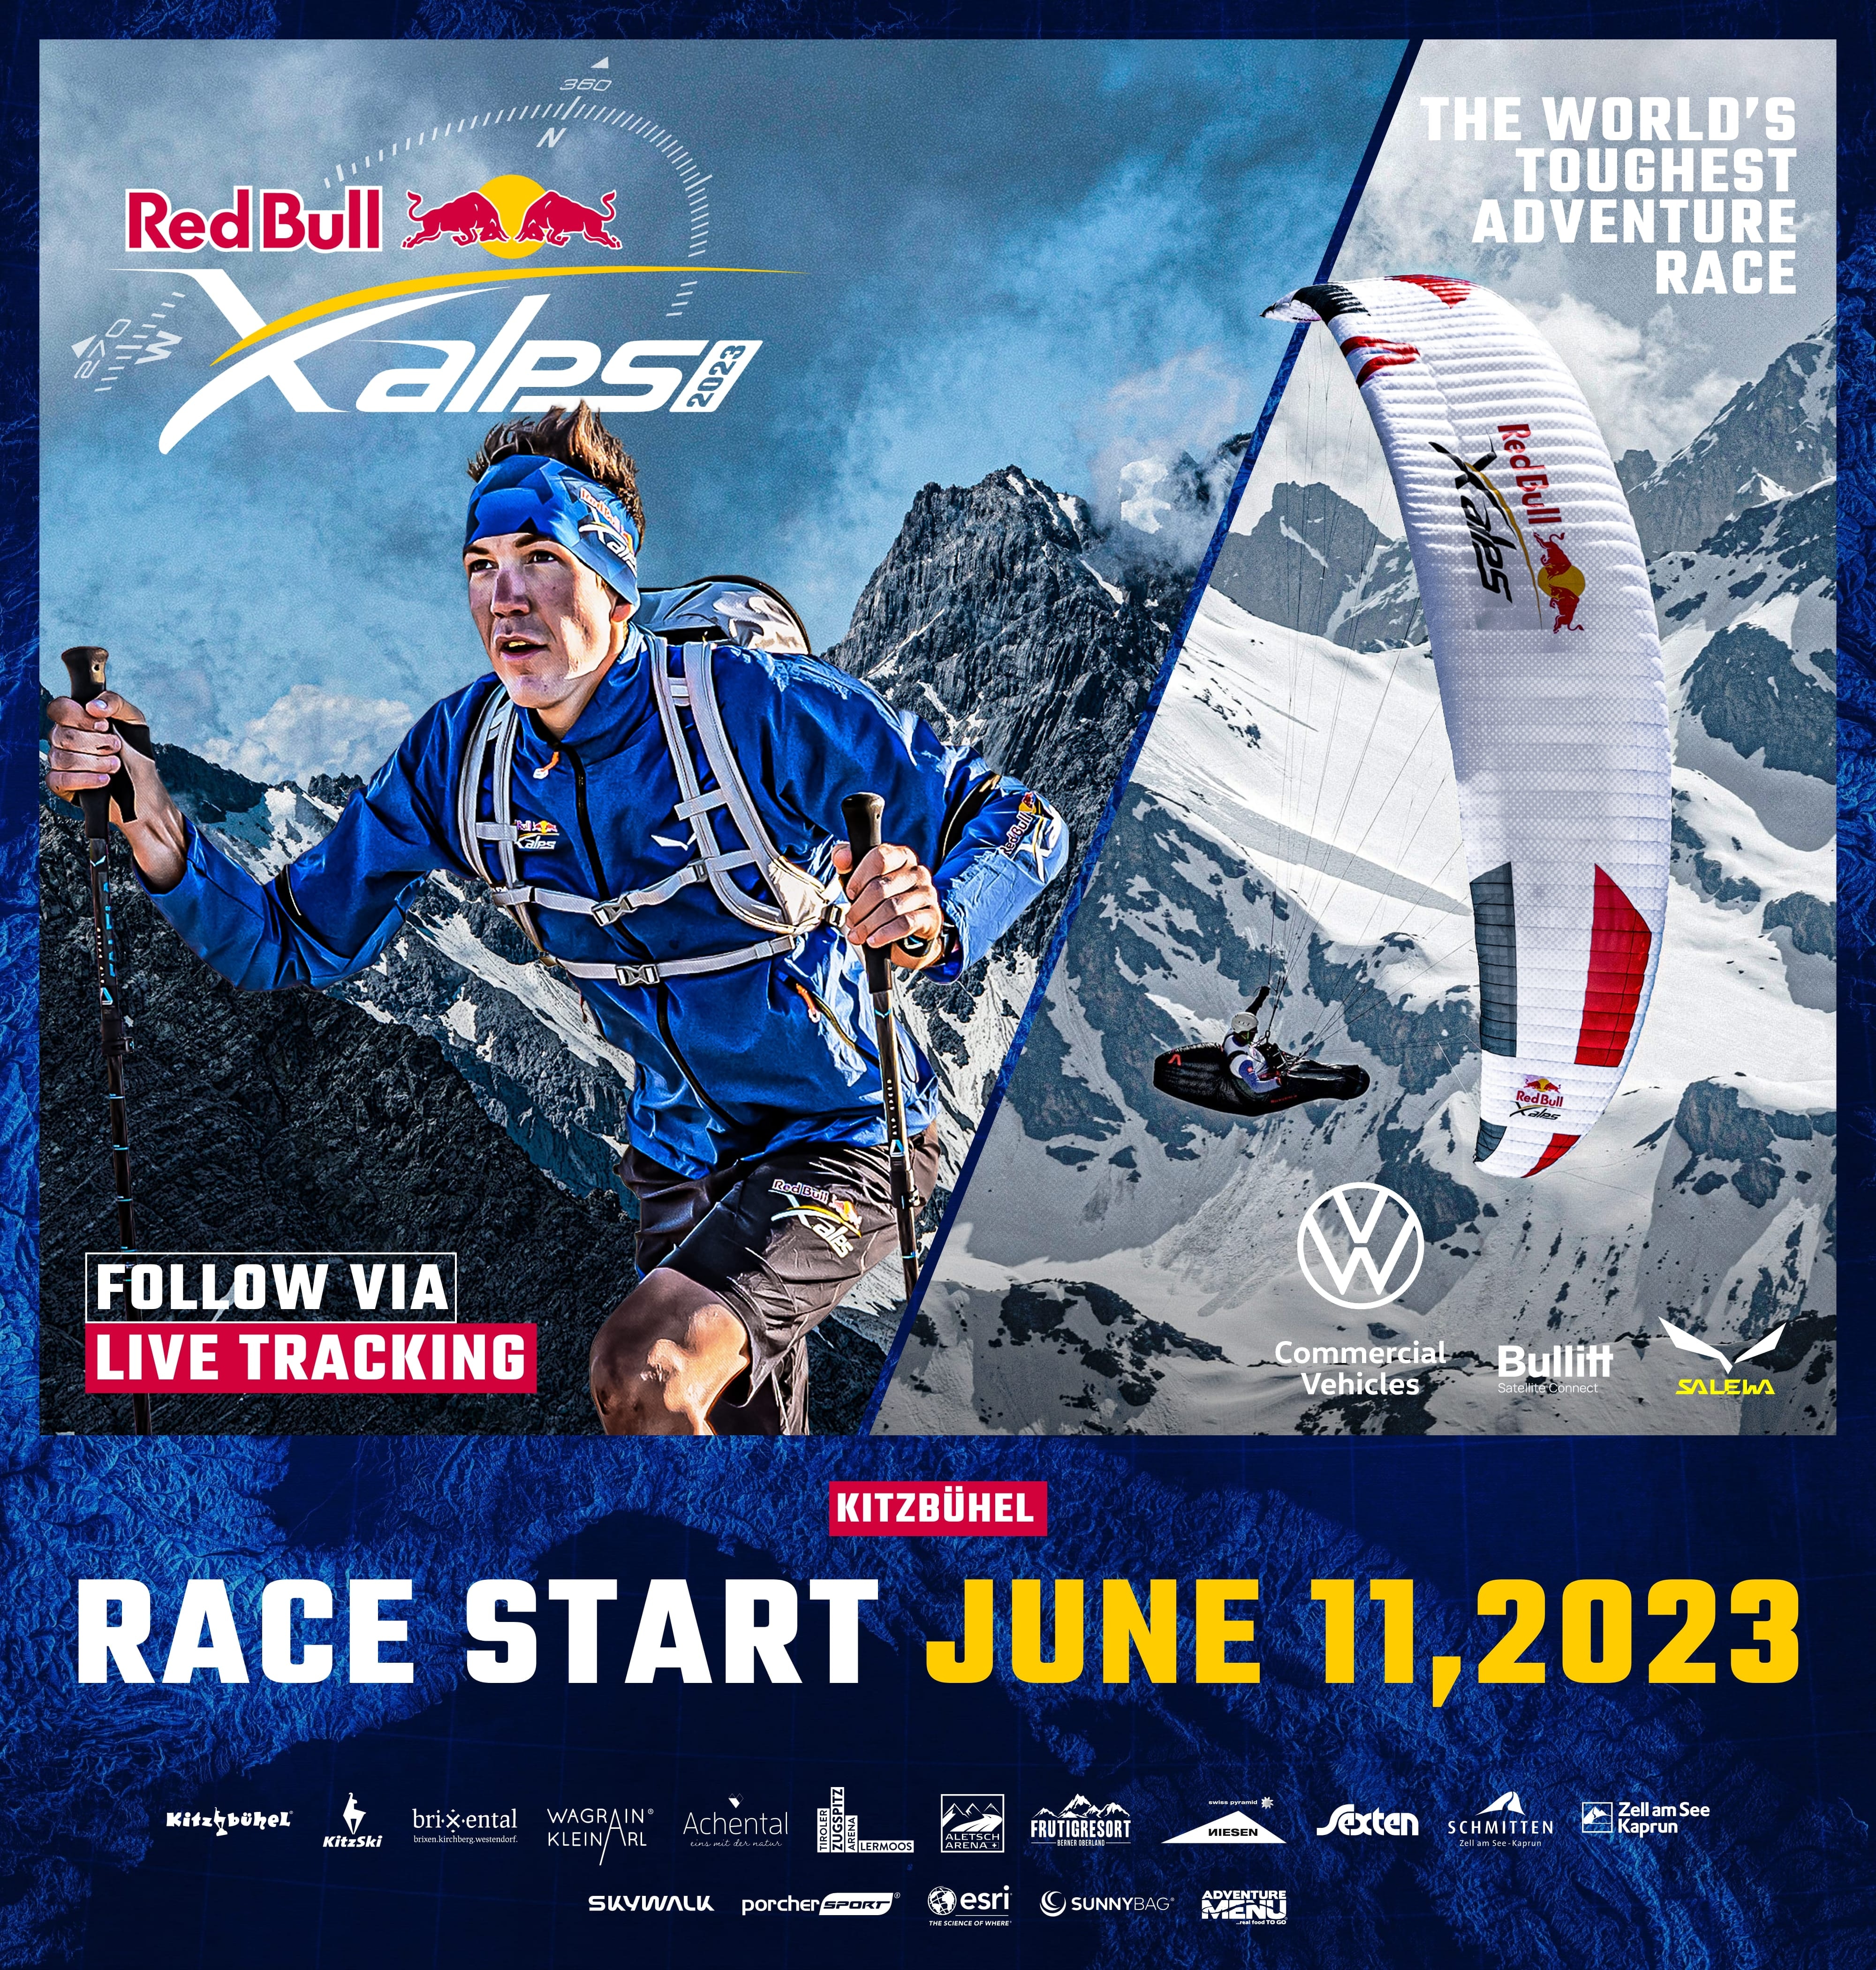 red bull x alps pre race holding graphic mobile